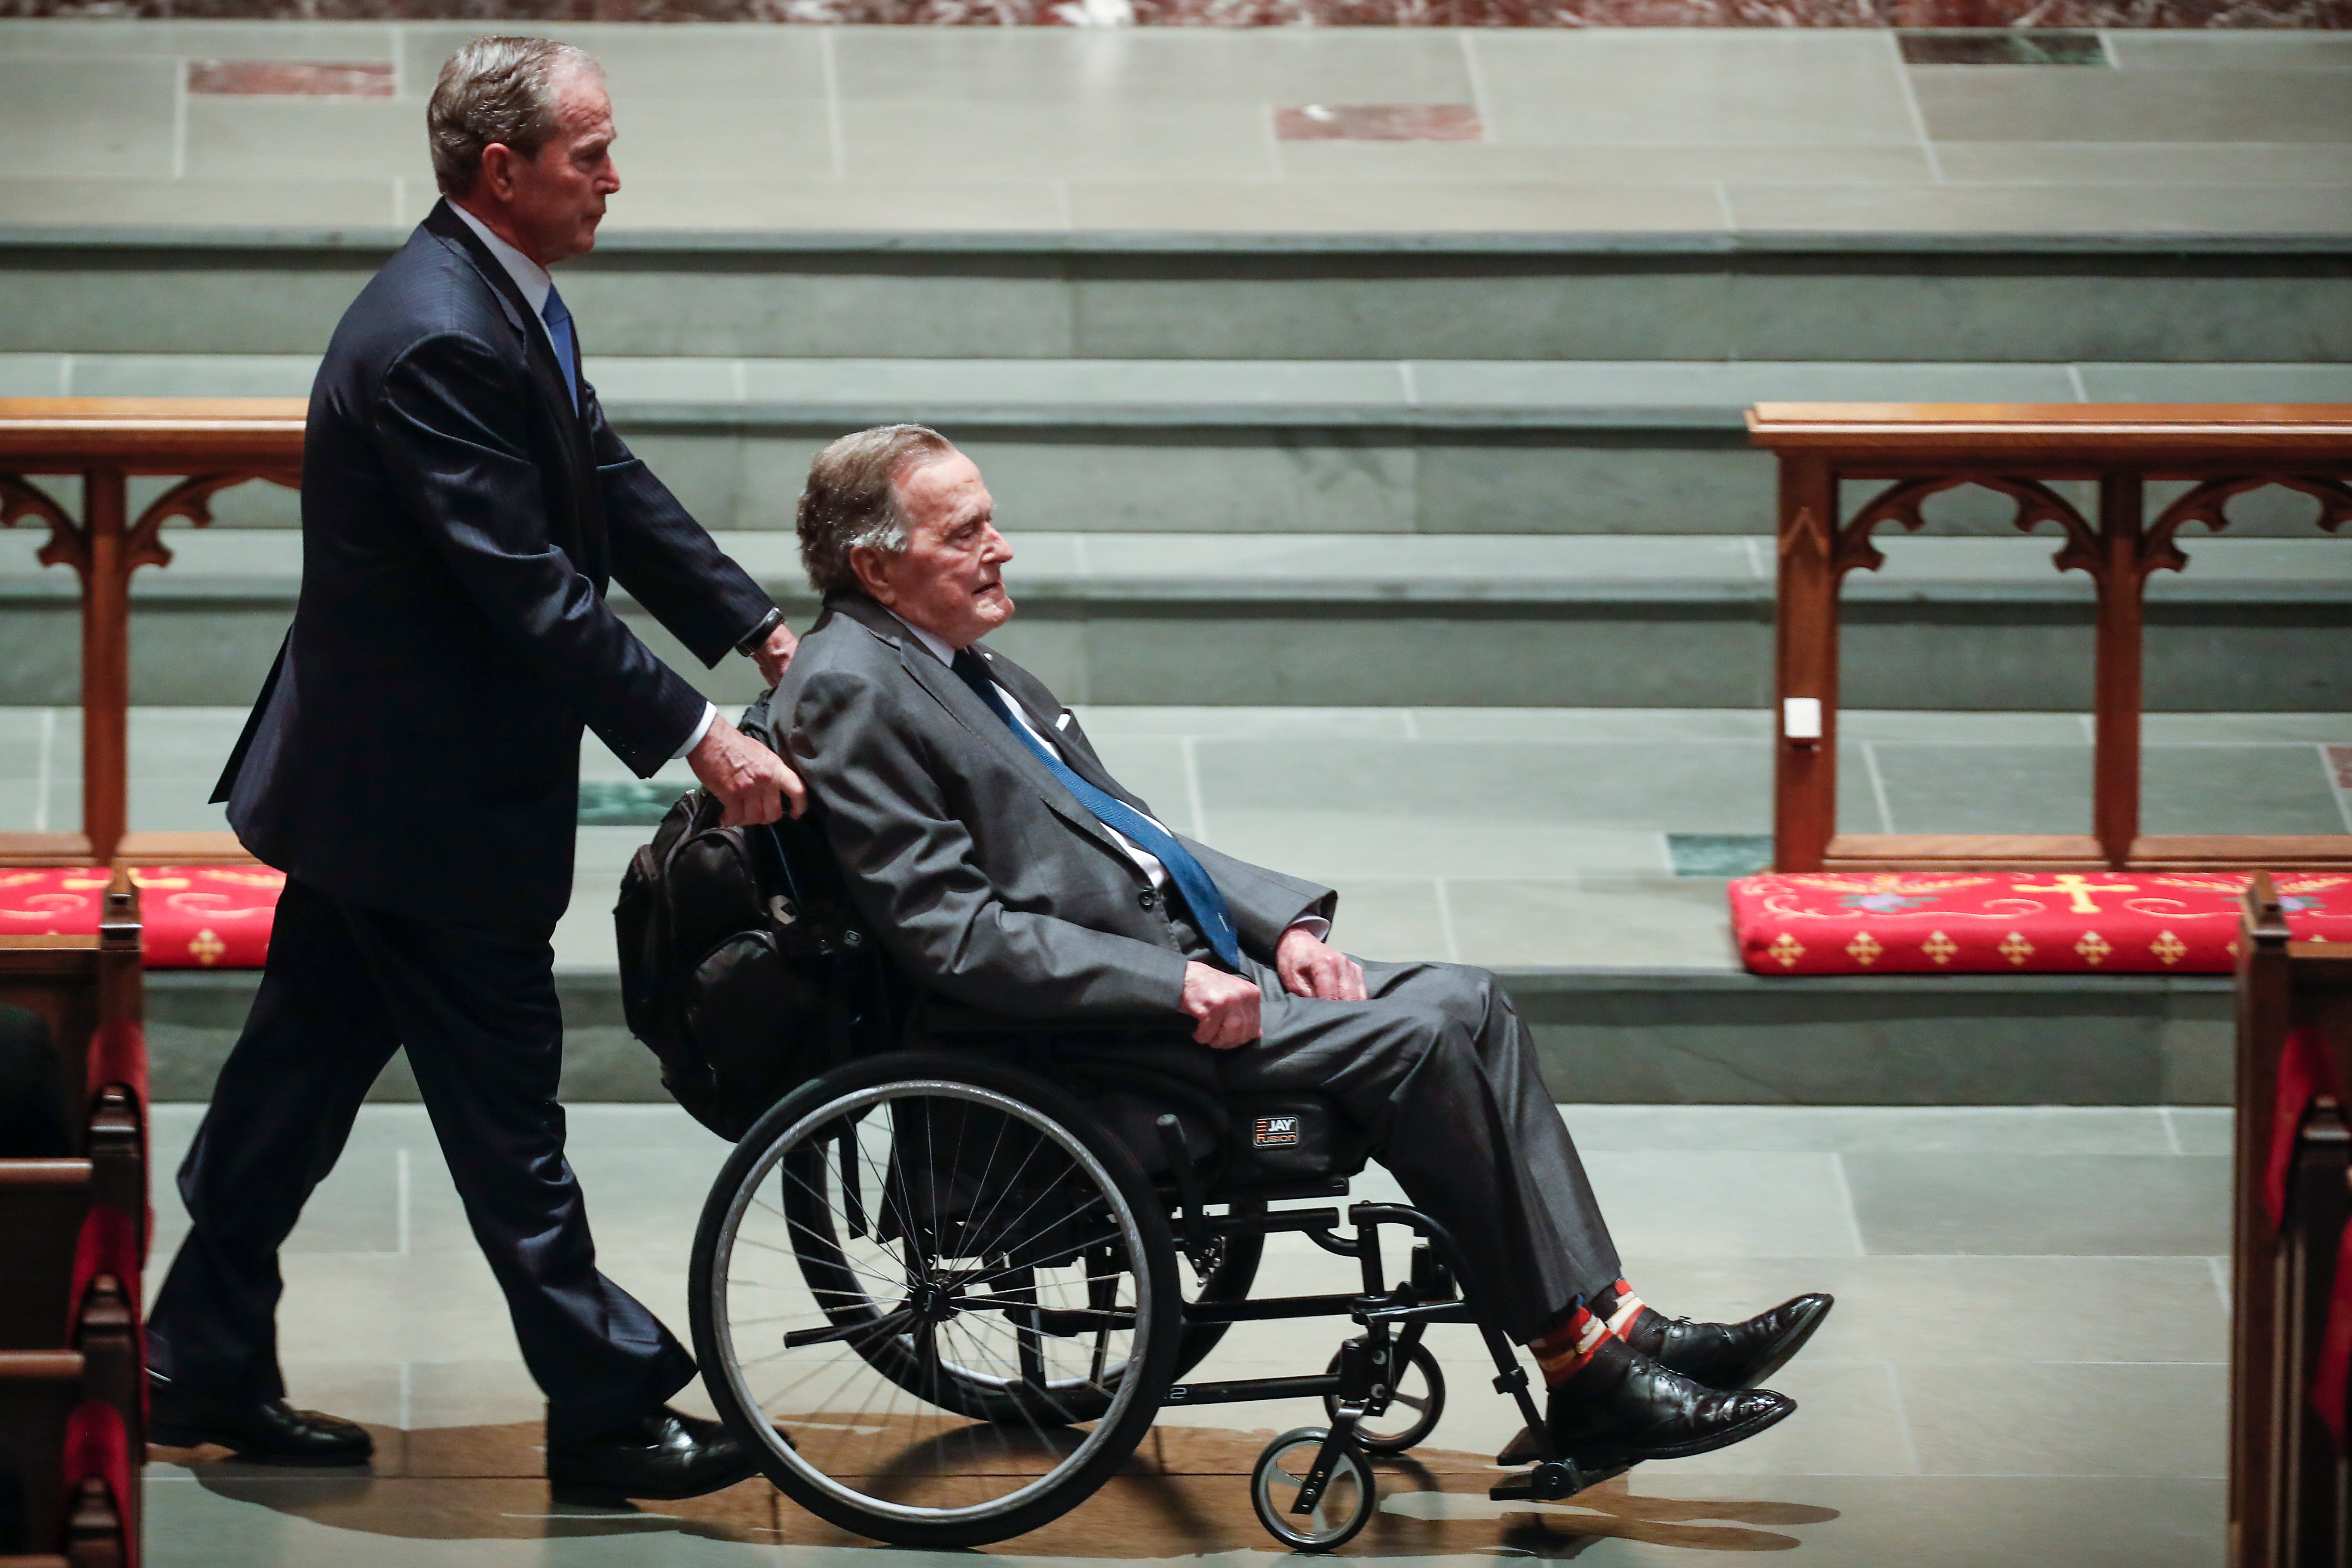 HOUSTON, TX - APRIL 21: Former president George W. Bush, left, wheels his father, former president George H.W. Bush into the church for the funeral for former first lady Barbara Bush at St. Martin's Episcopal Church on April 21, 2018 in Houston, Texas. Bush, wife of former president George H. W. Bush and mother of former president George W. Bush, died at her home in Houston on April 17 at the age of 92. (Photo by Brett Coomer - Pool/Getty Images)